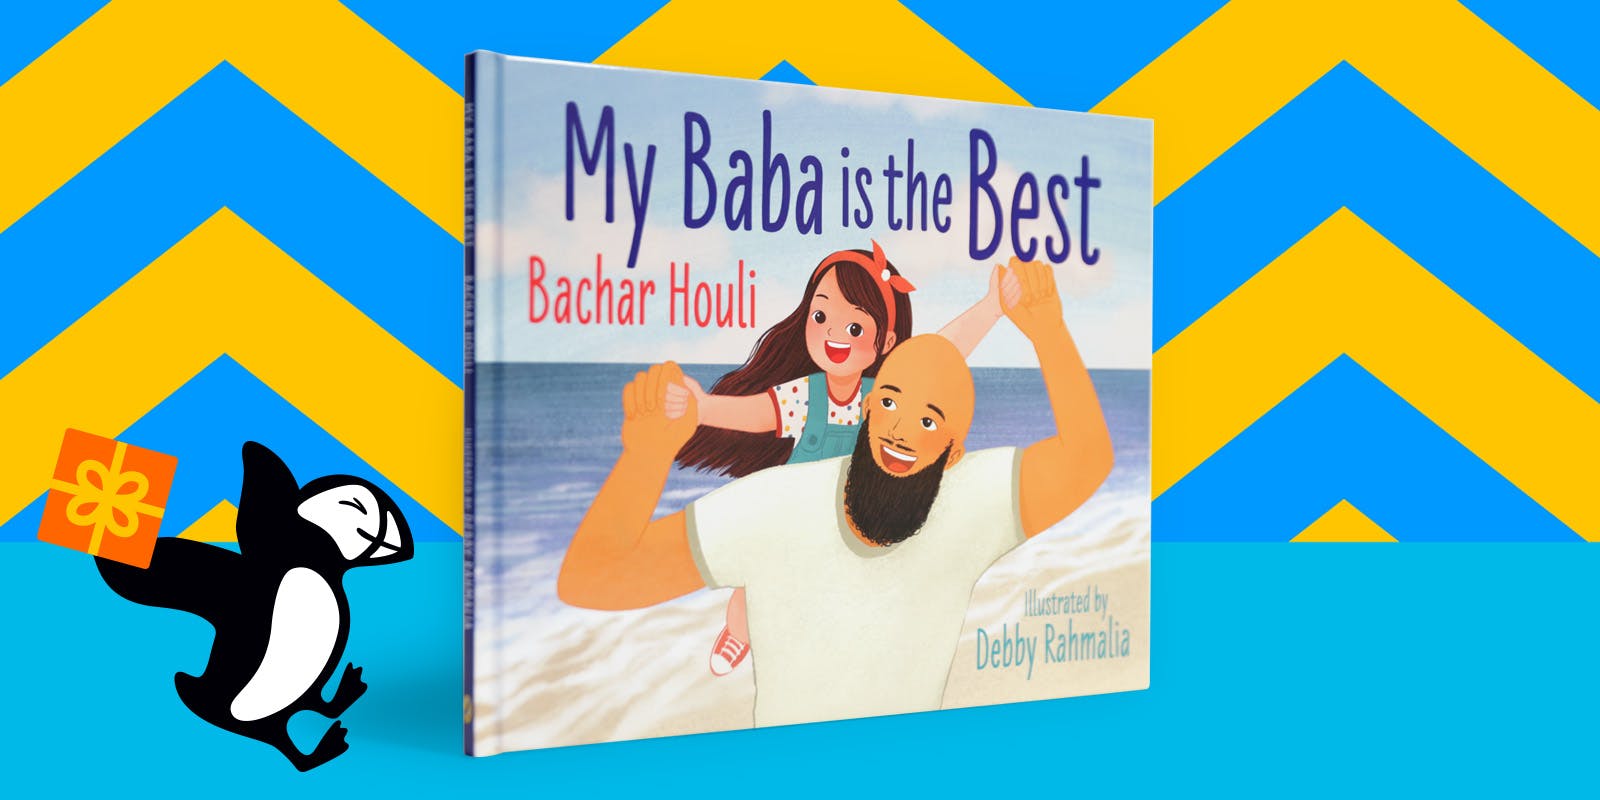 Bachar Houli on writing a picture book, just in time for Father's Day